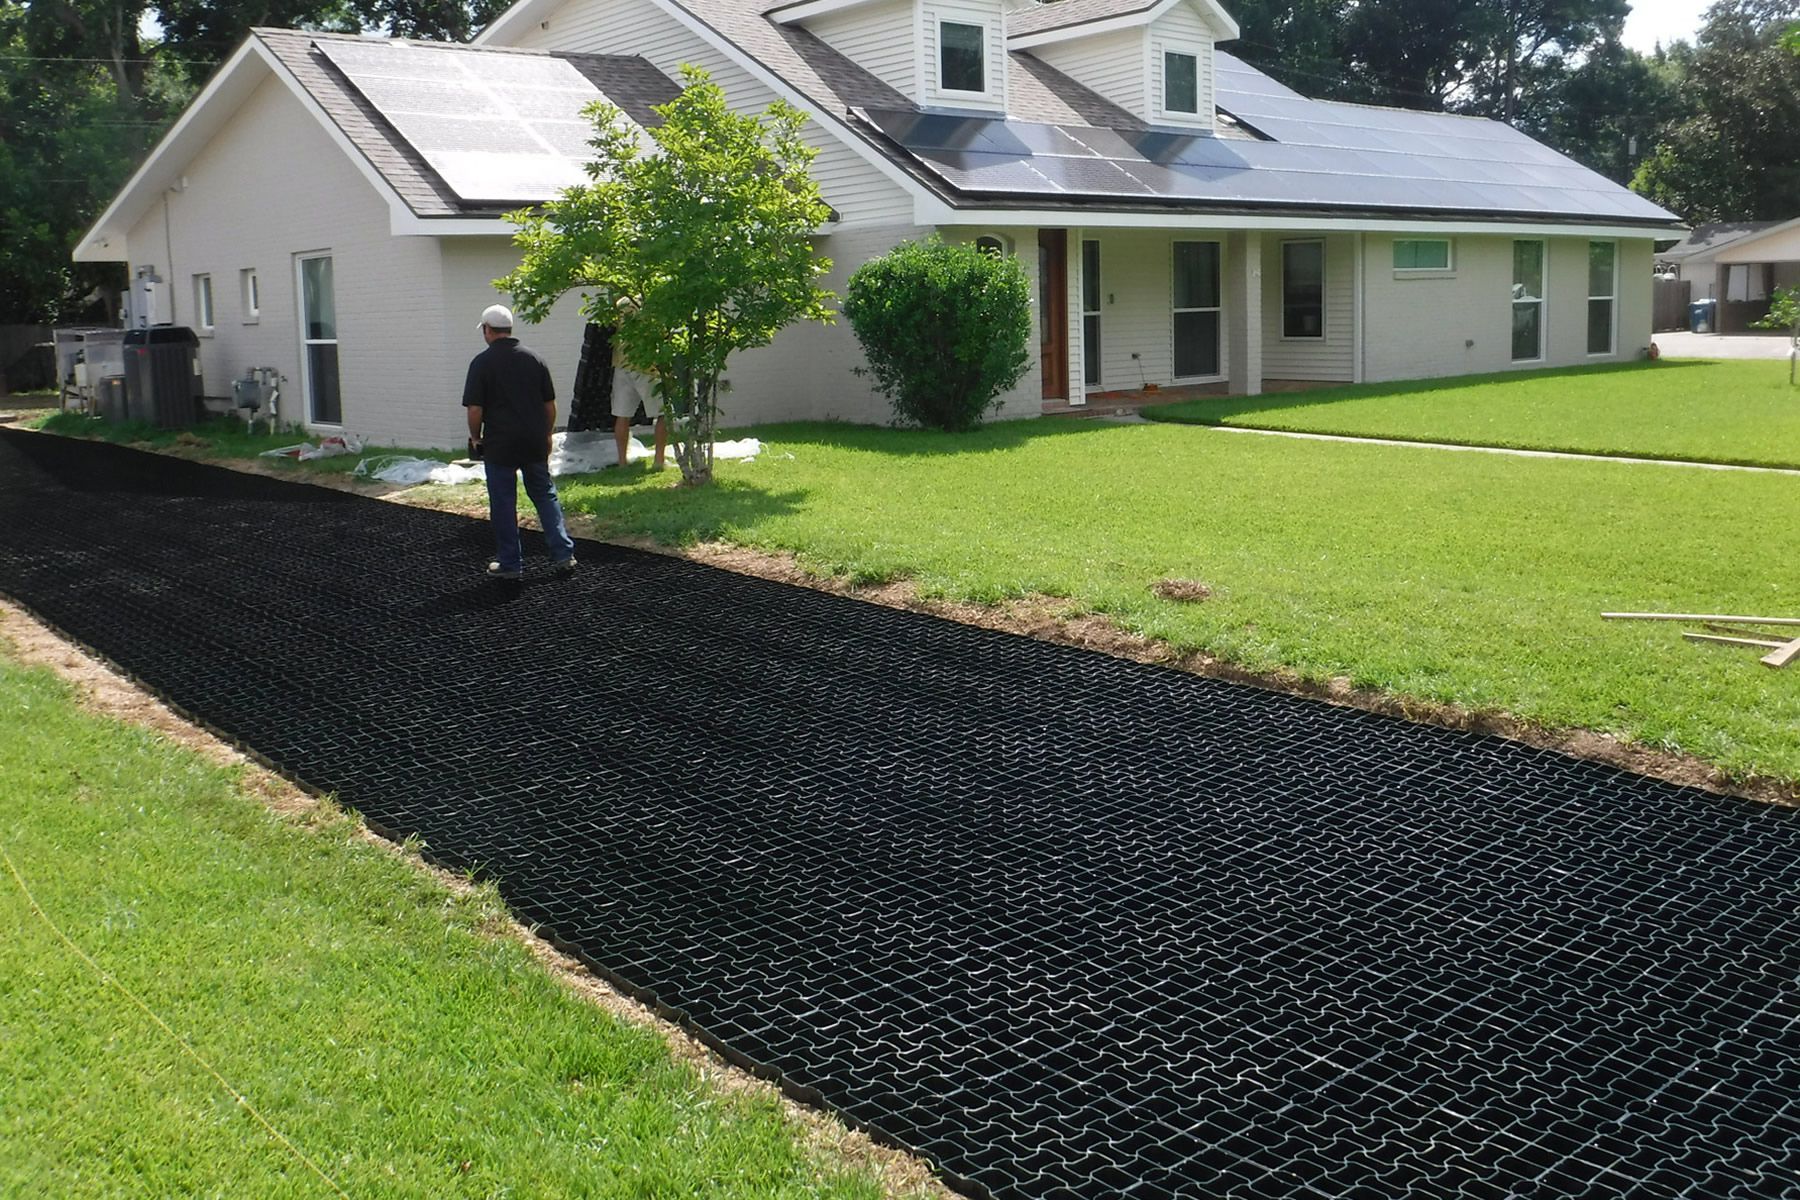 Grass Pavers - Permeable Paving Grid - StartPave G50